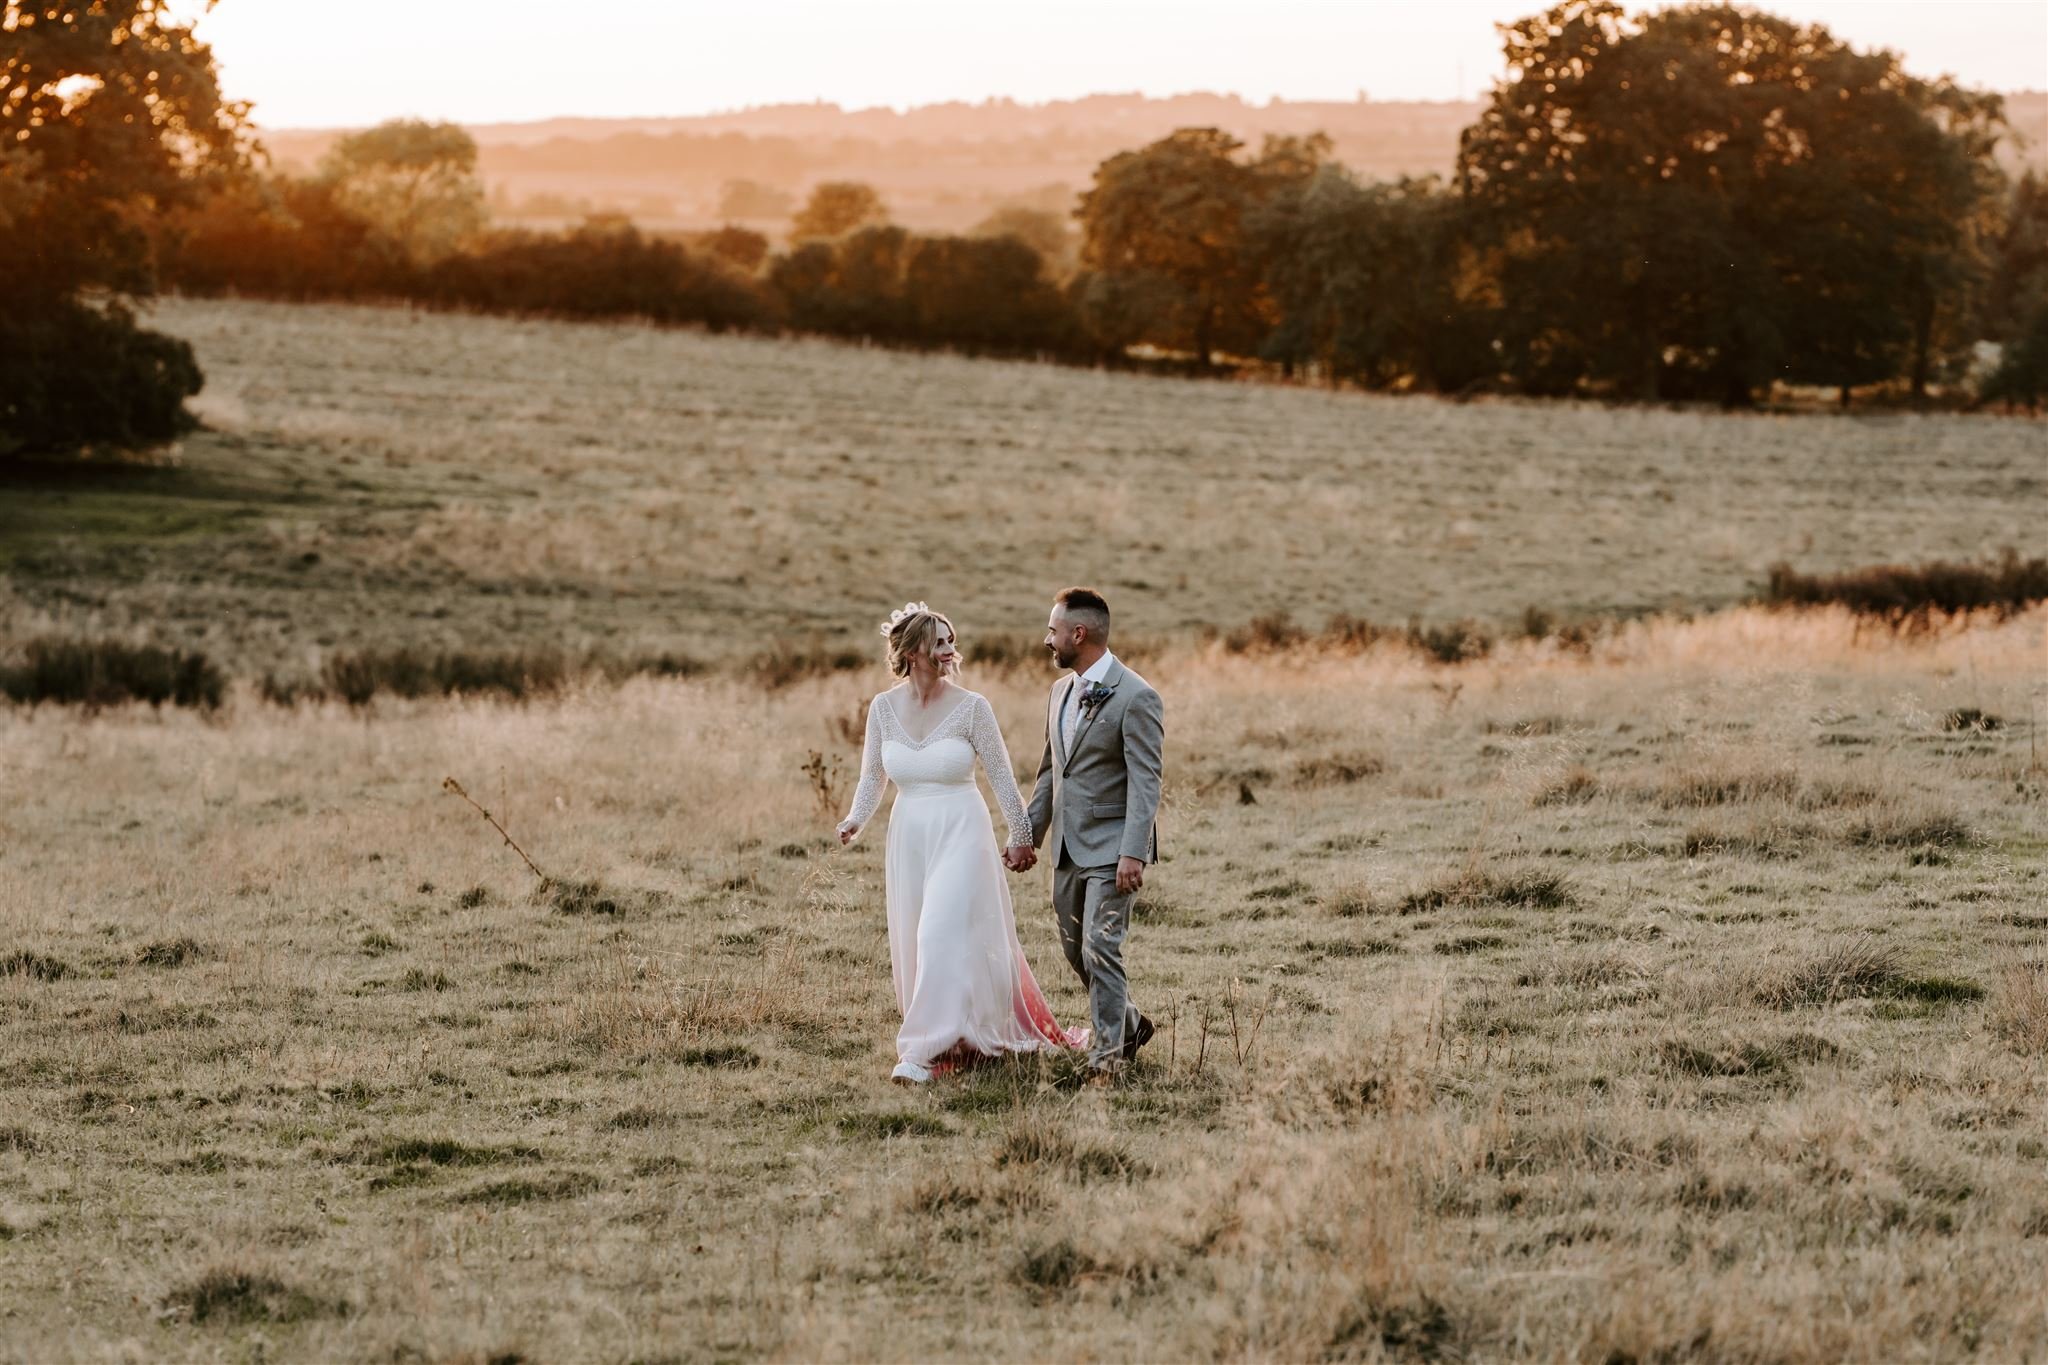 bride and groom walking in field on wedding day during a golden hour with bright orange skies and sun setting behind them Buckminister Barns wedding 